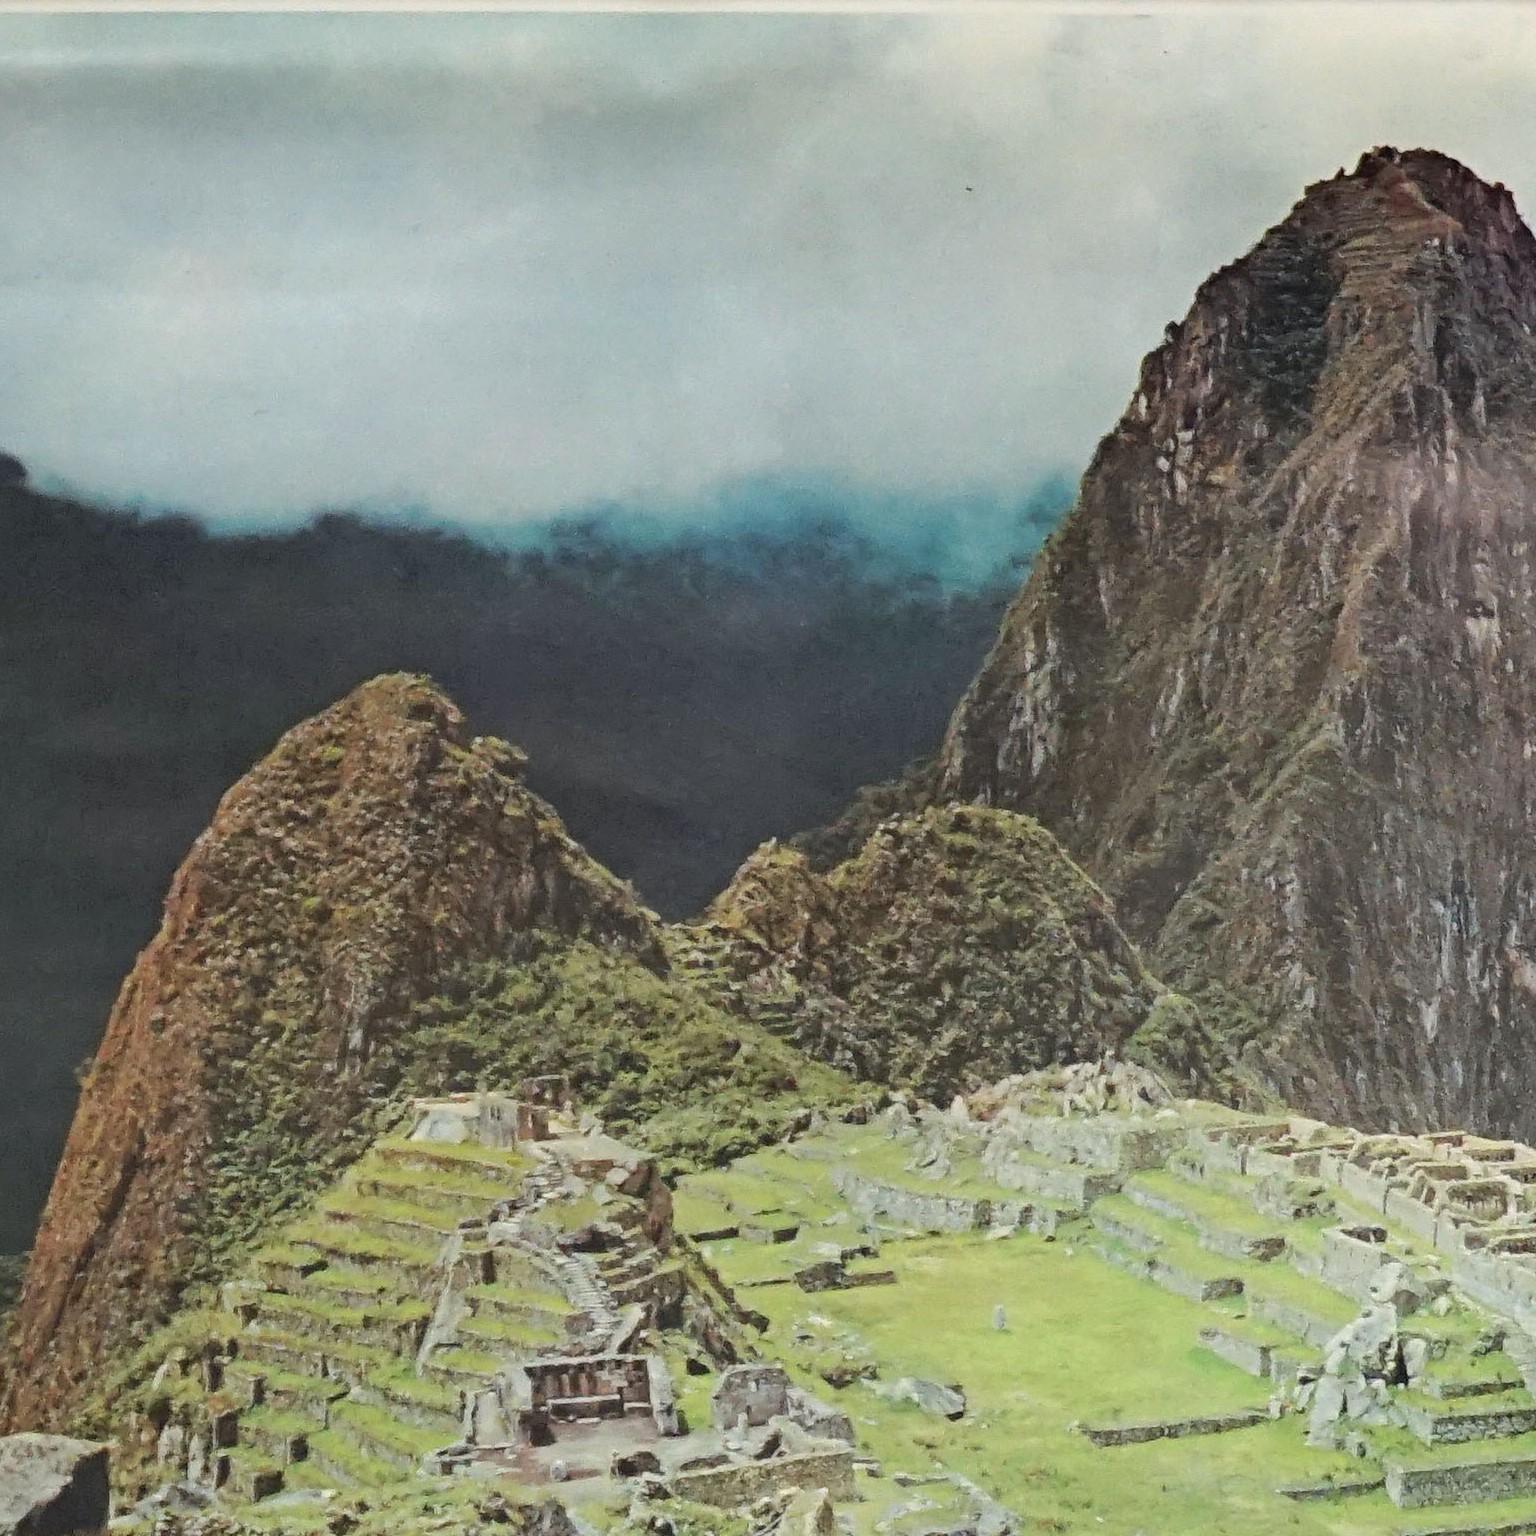 Macchu Picchu Inca City Peru Vintage Photo Poster Rollable Wall Chart

The vintage pull-down photo poster wallchart shows the mystical Macchu Picchu Inca City in Peru. Published by Westermann. Colorful print on paper reinforced with